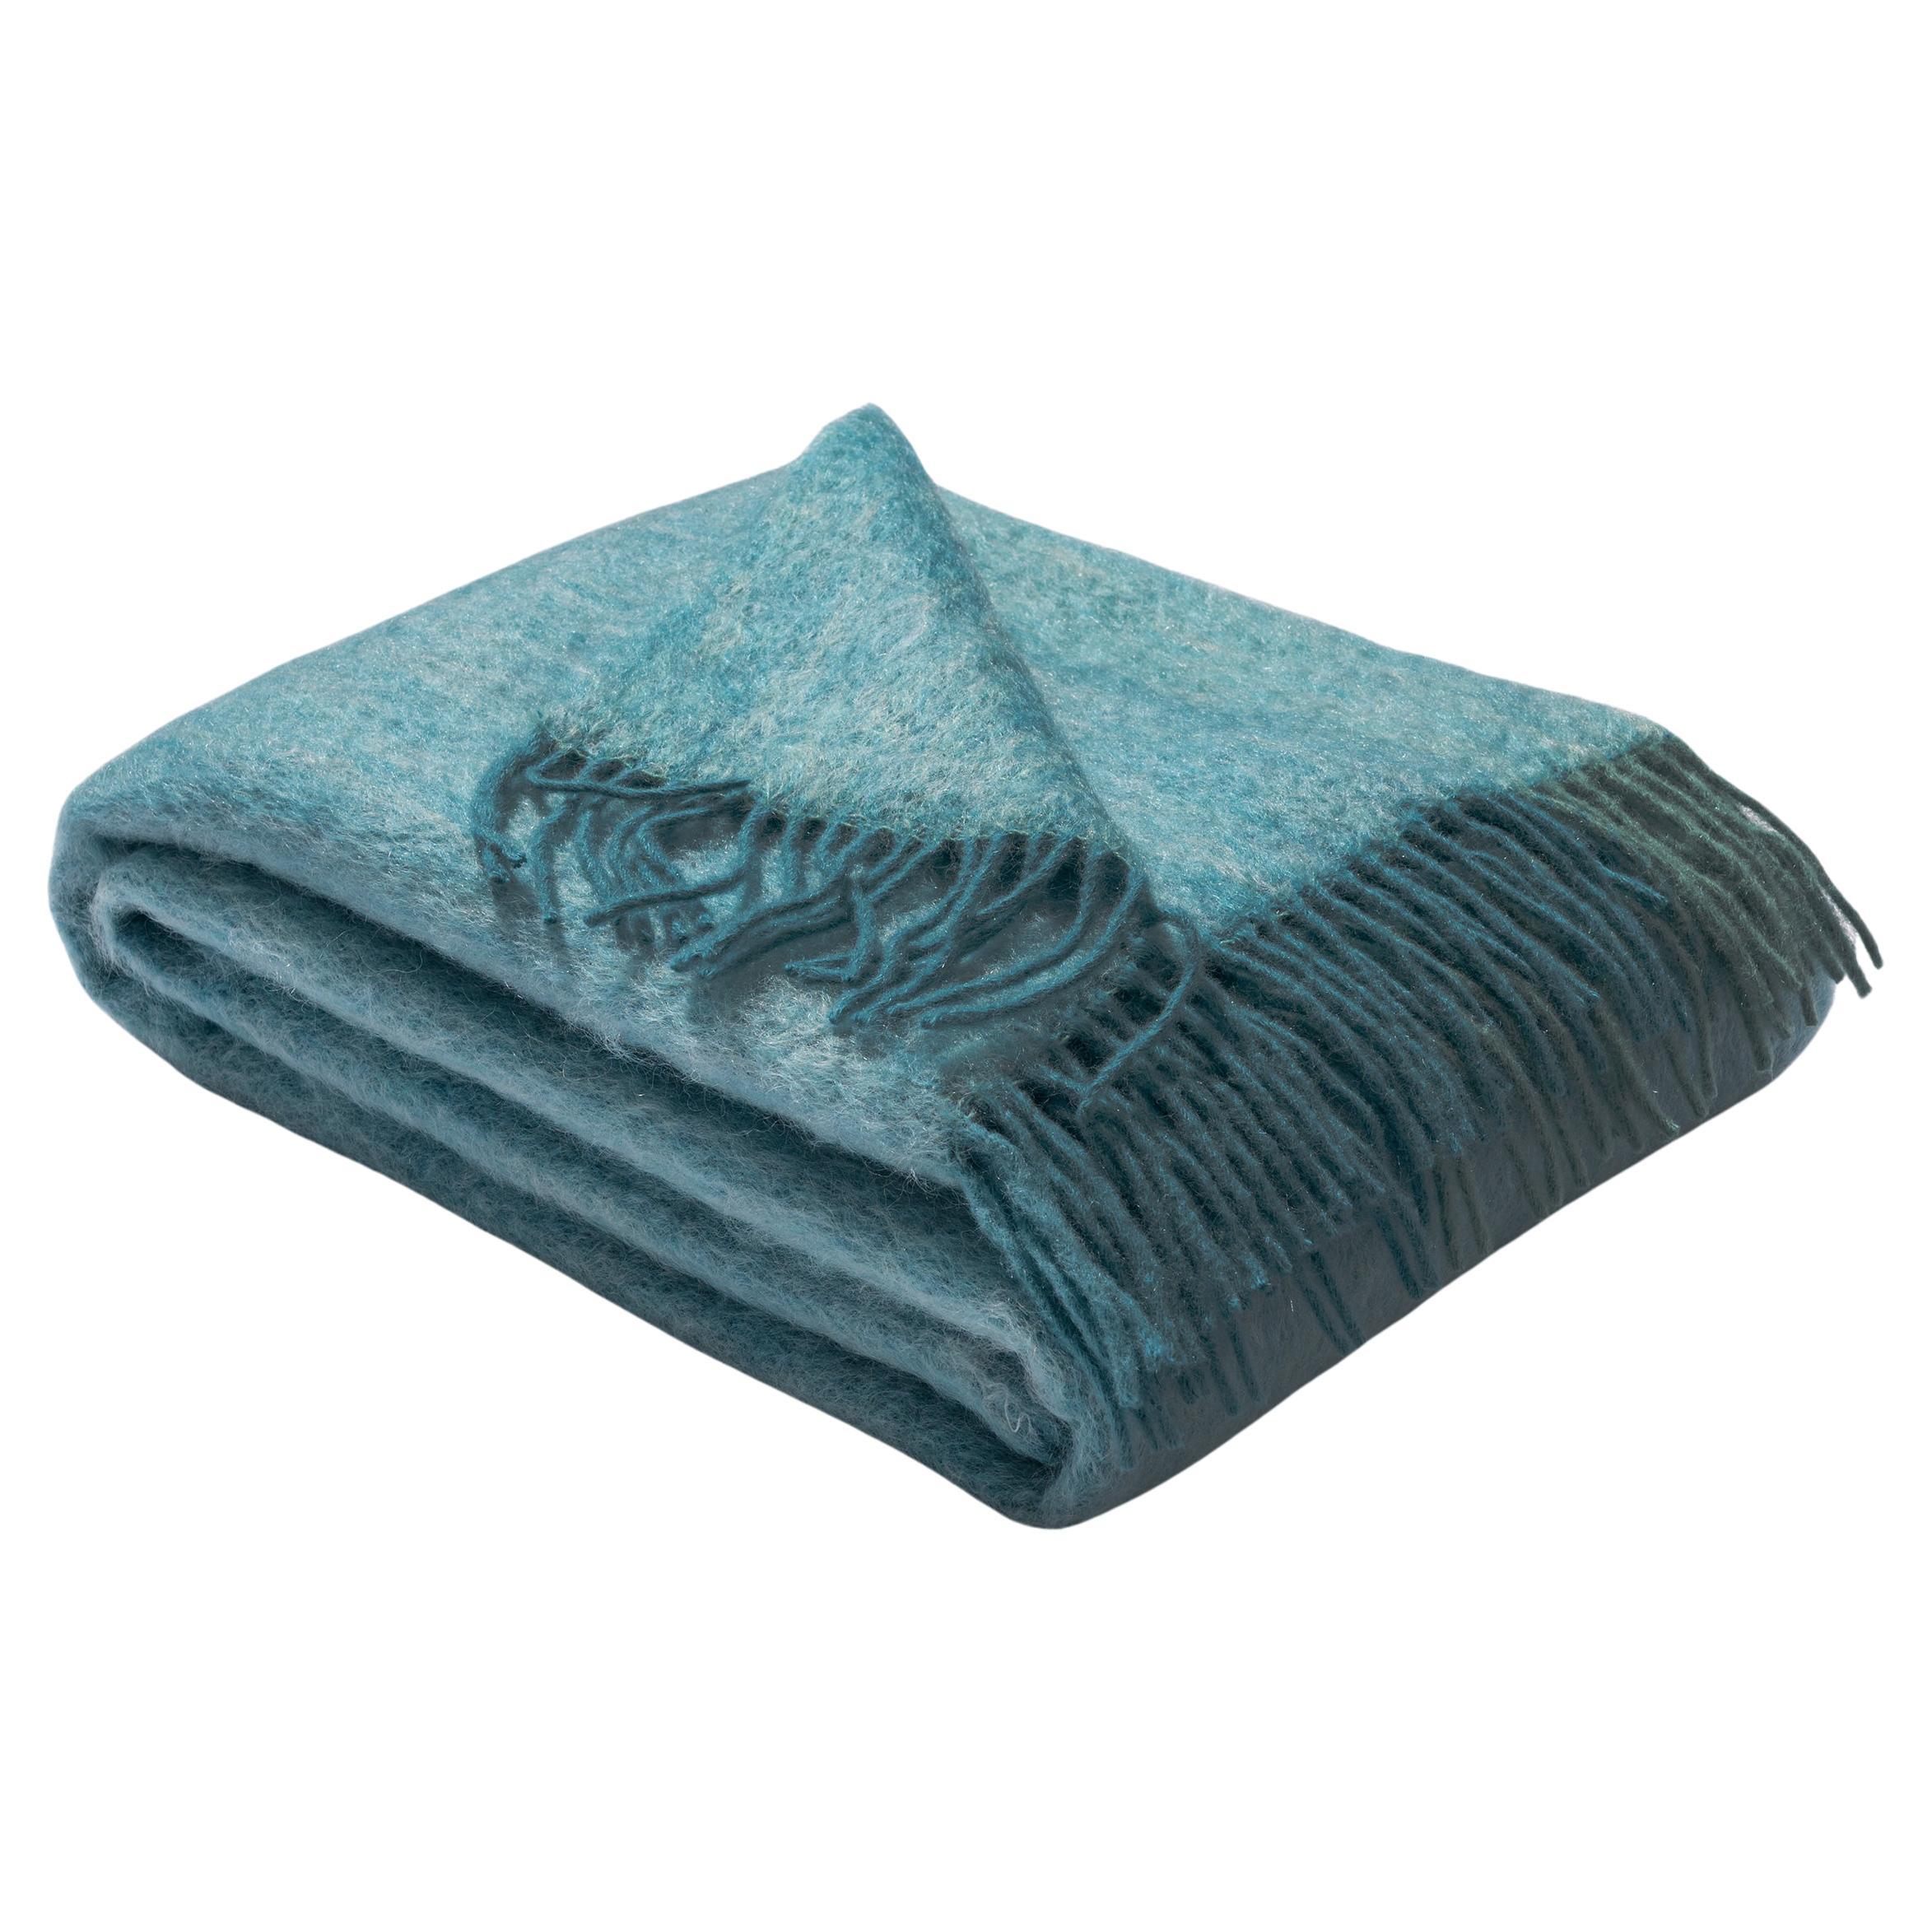 Mohair Blanket Turquoise Woven of Mohair and Wool by Catharina Mende